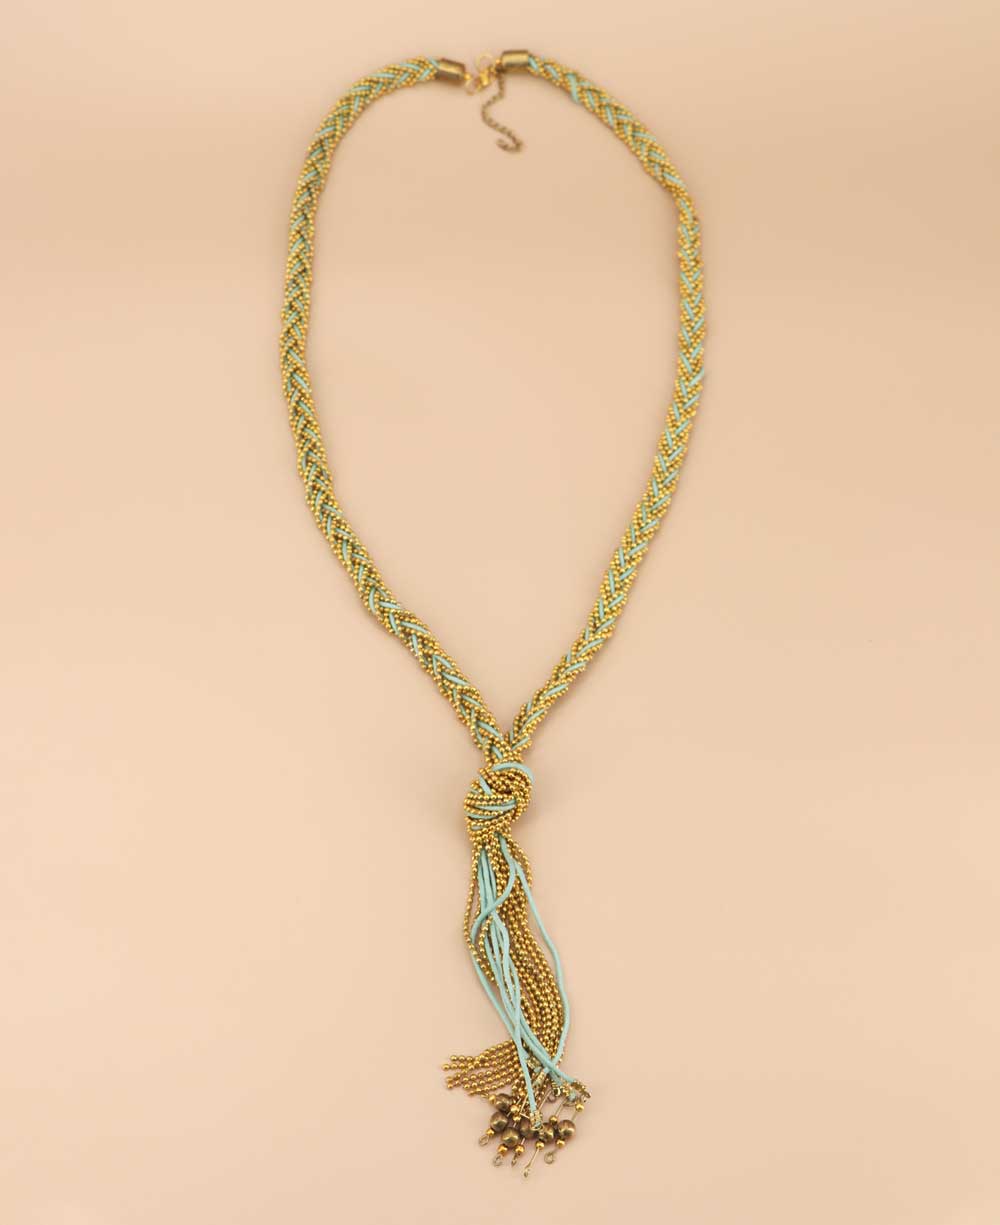 Artisanal aqua blue necklace with metal beads and threads